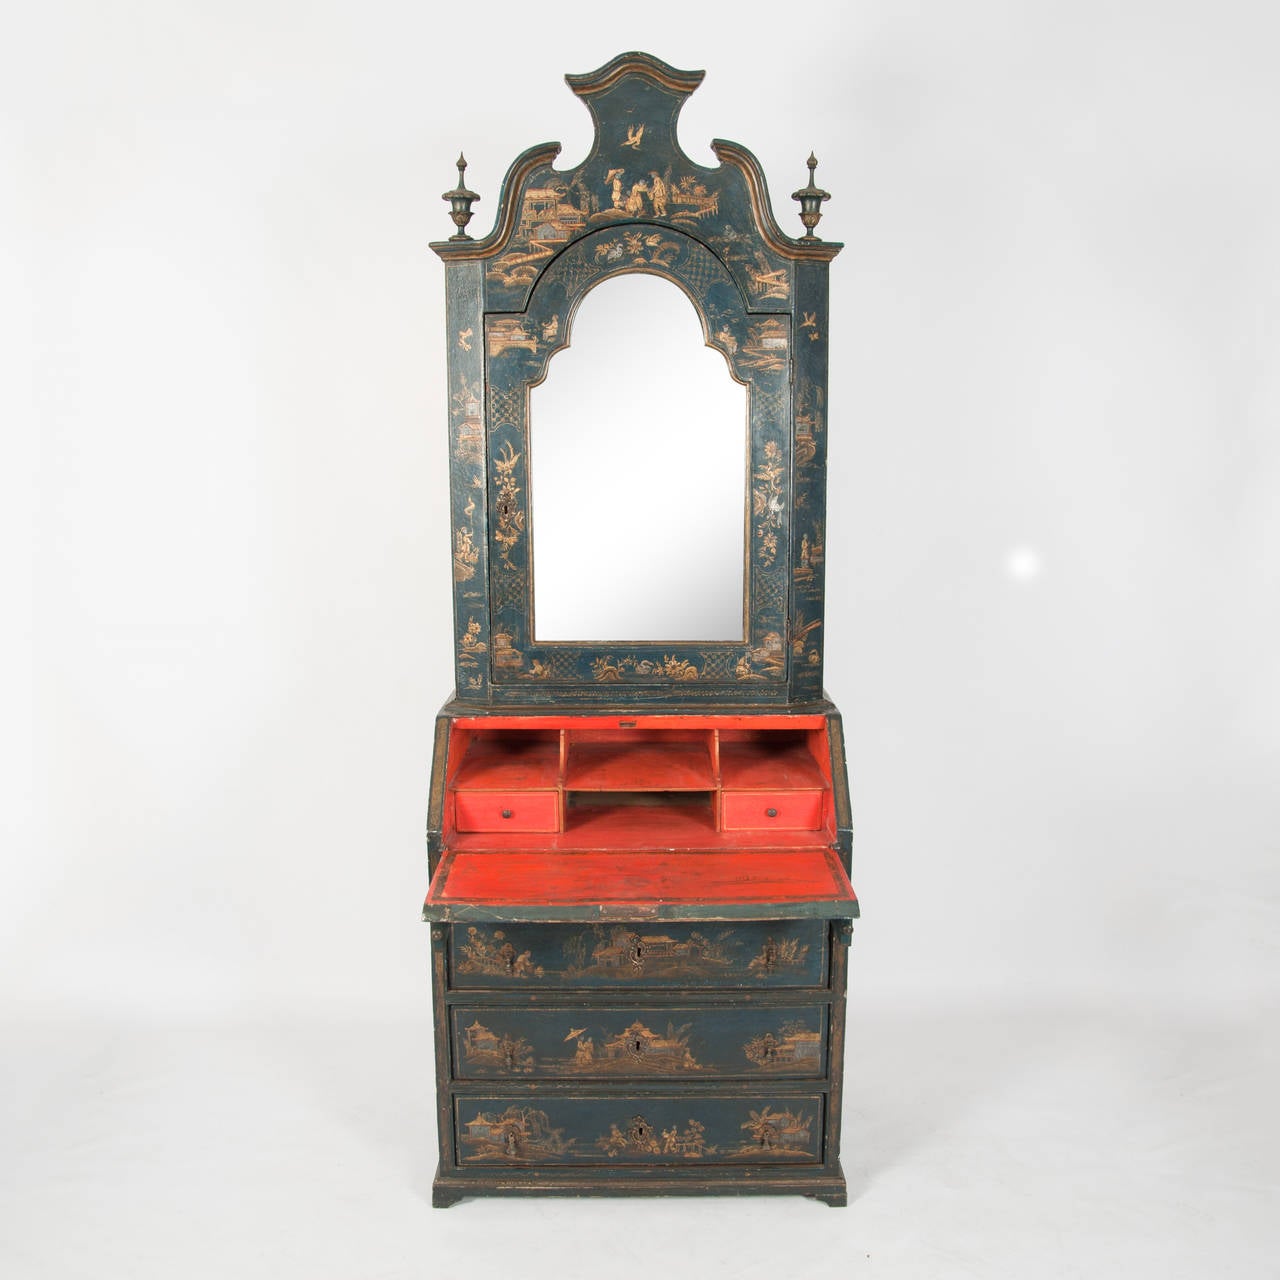 Hand-Painted Rare 18th Century Northern Italian Lacquer Bureau Bookcase For Sale